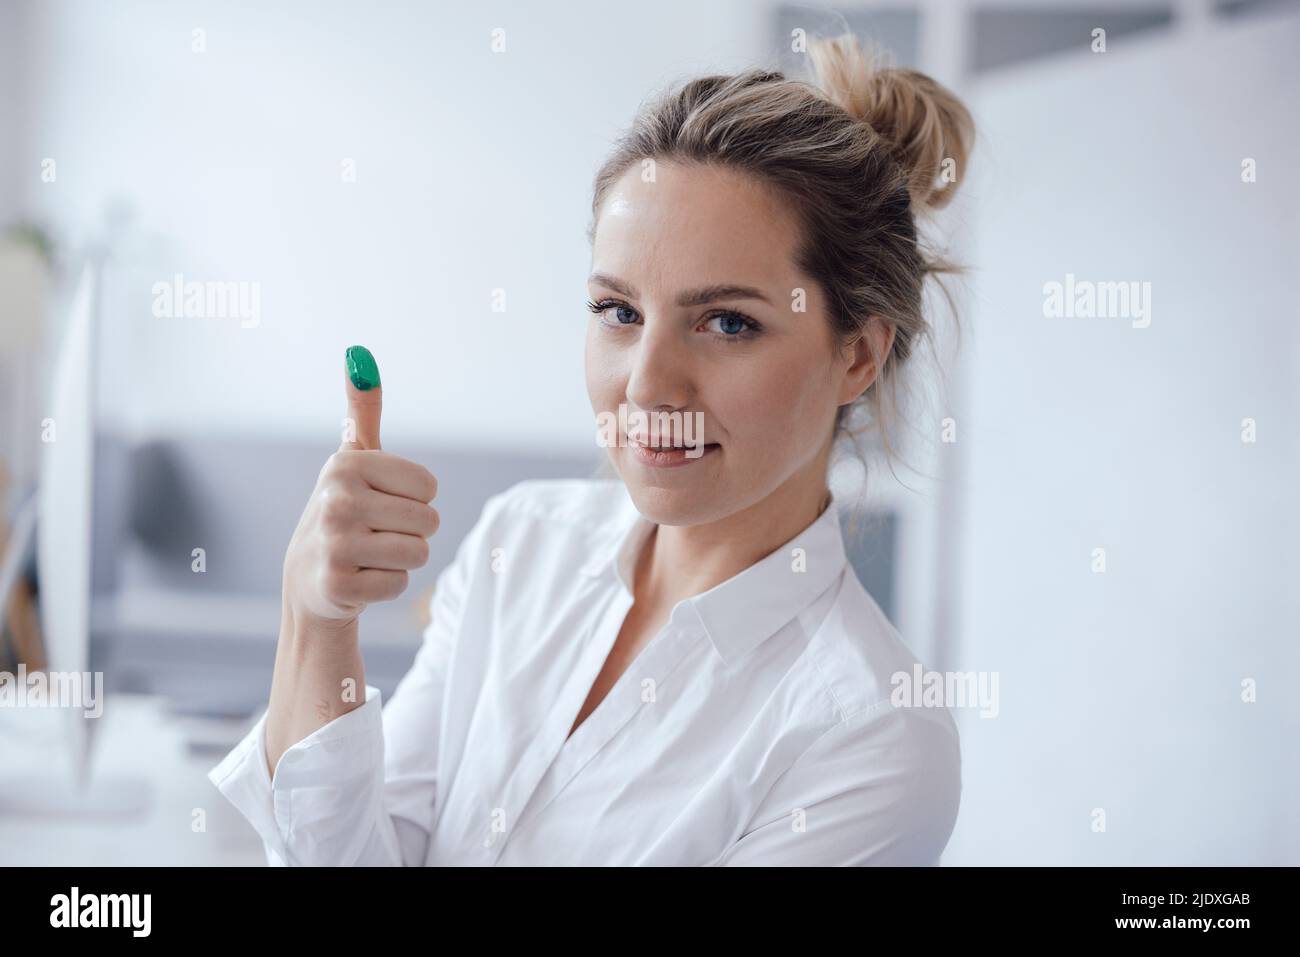 Businesswoman showing green color on thumb in office Stock Photo